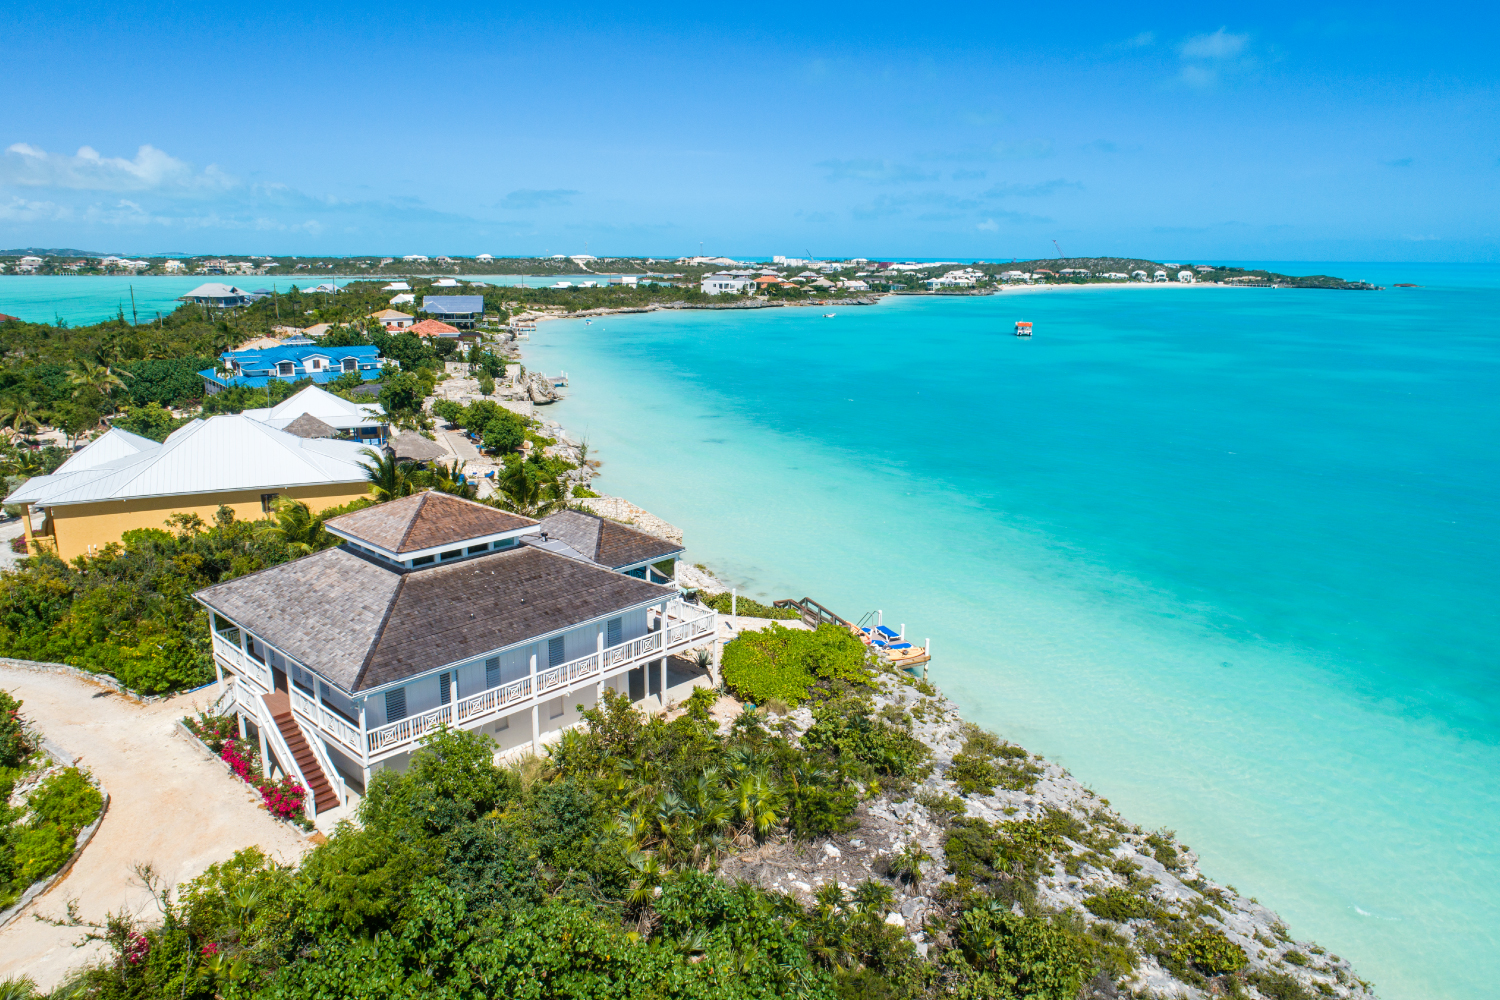 The island of Providenciales awaits you.